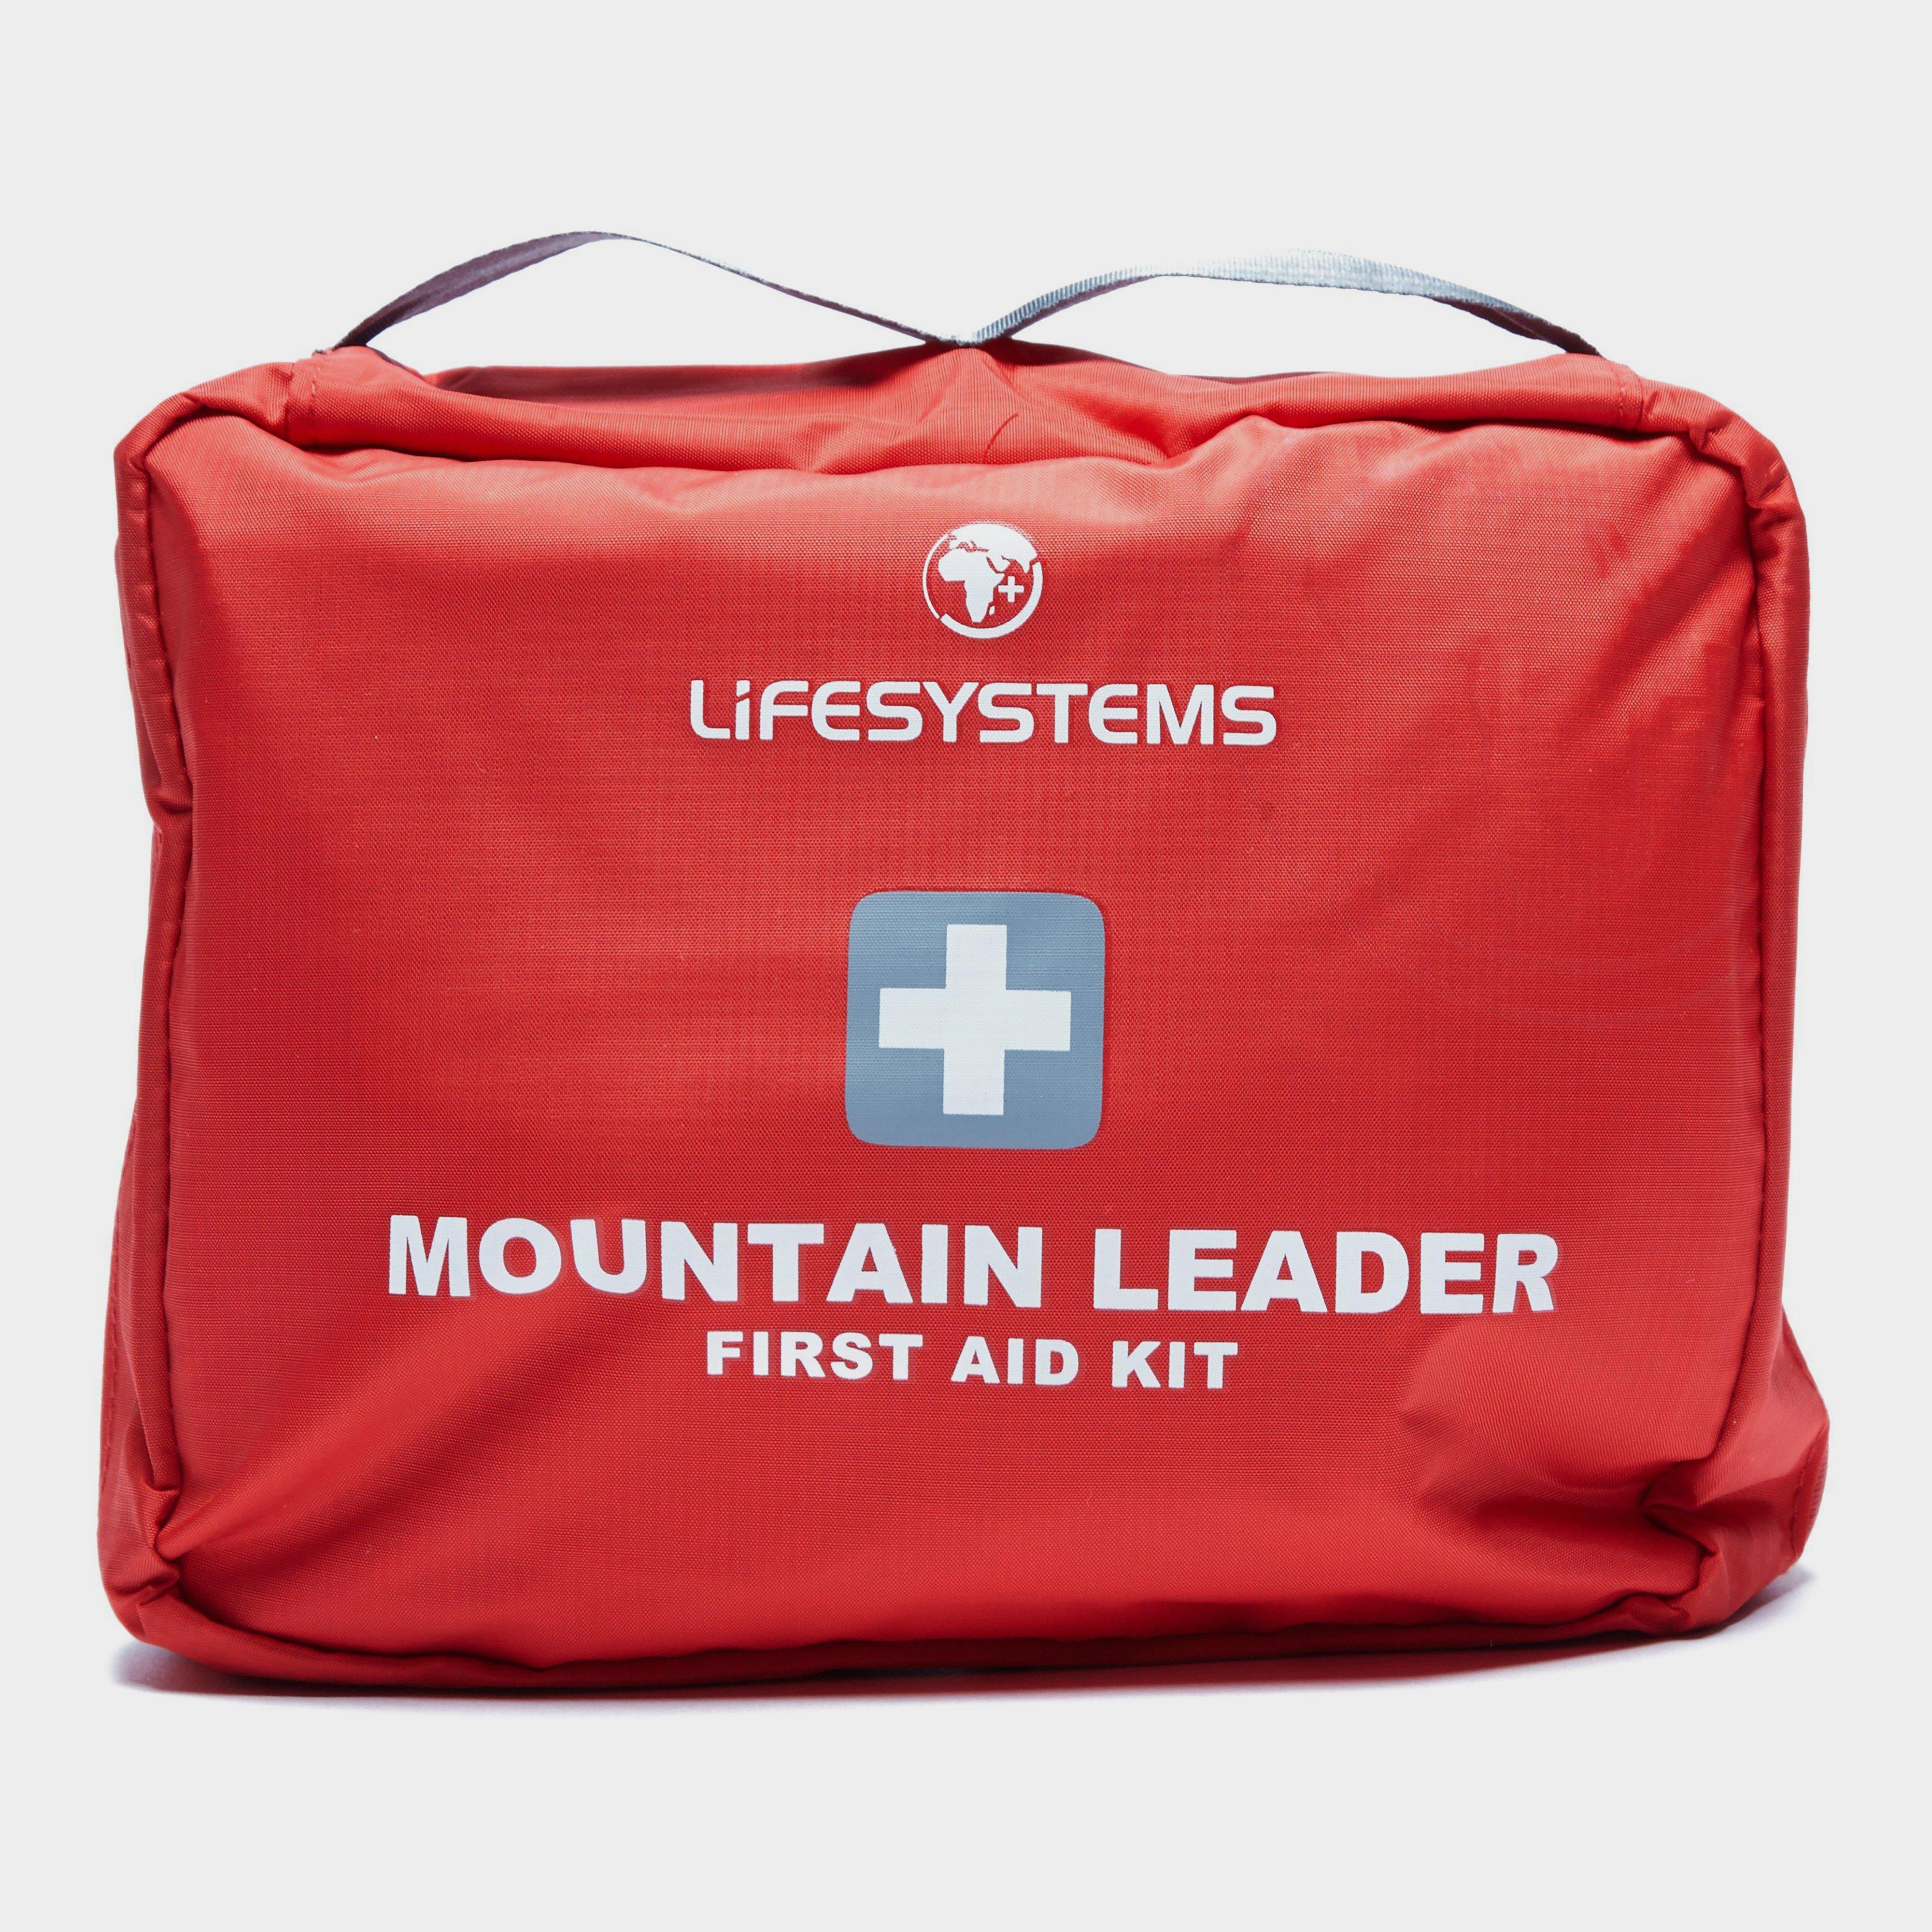  Lifesystems Mountain Leader First Aid Kit, Red